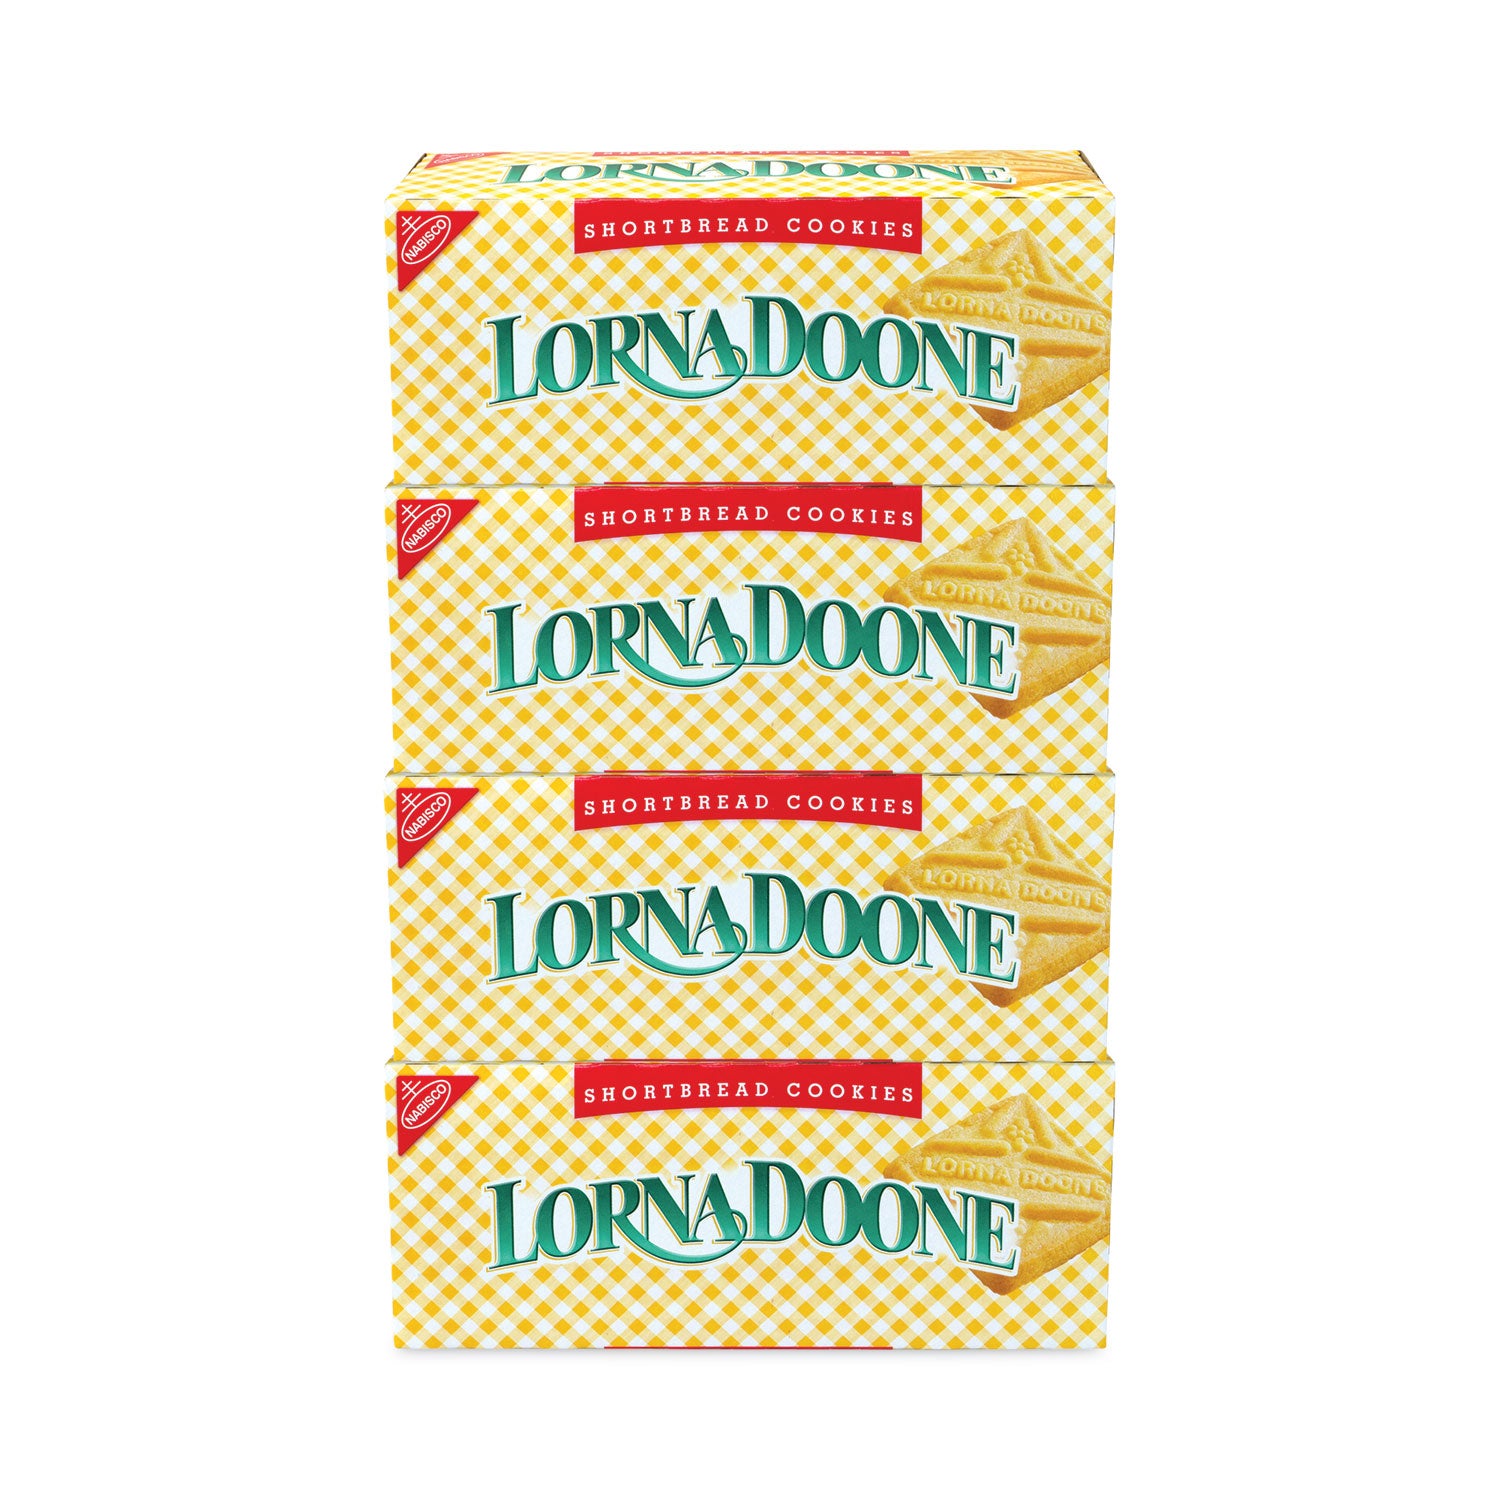 lorna-doone-shortbread-cookies-1-oz-packet-120-packets-box-4-boxes-carton-ships-in-1-3-business-days_grr30400097 - 4